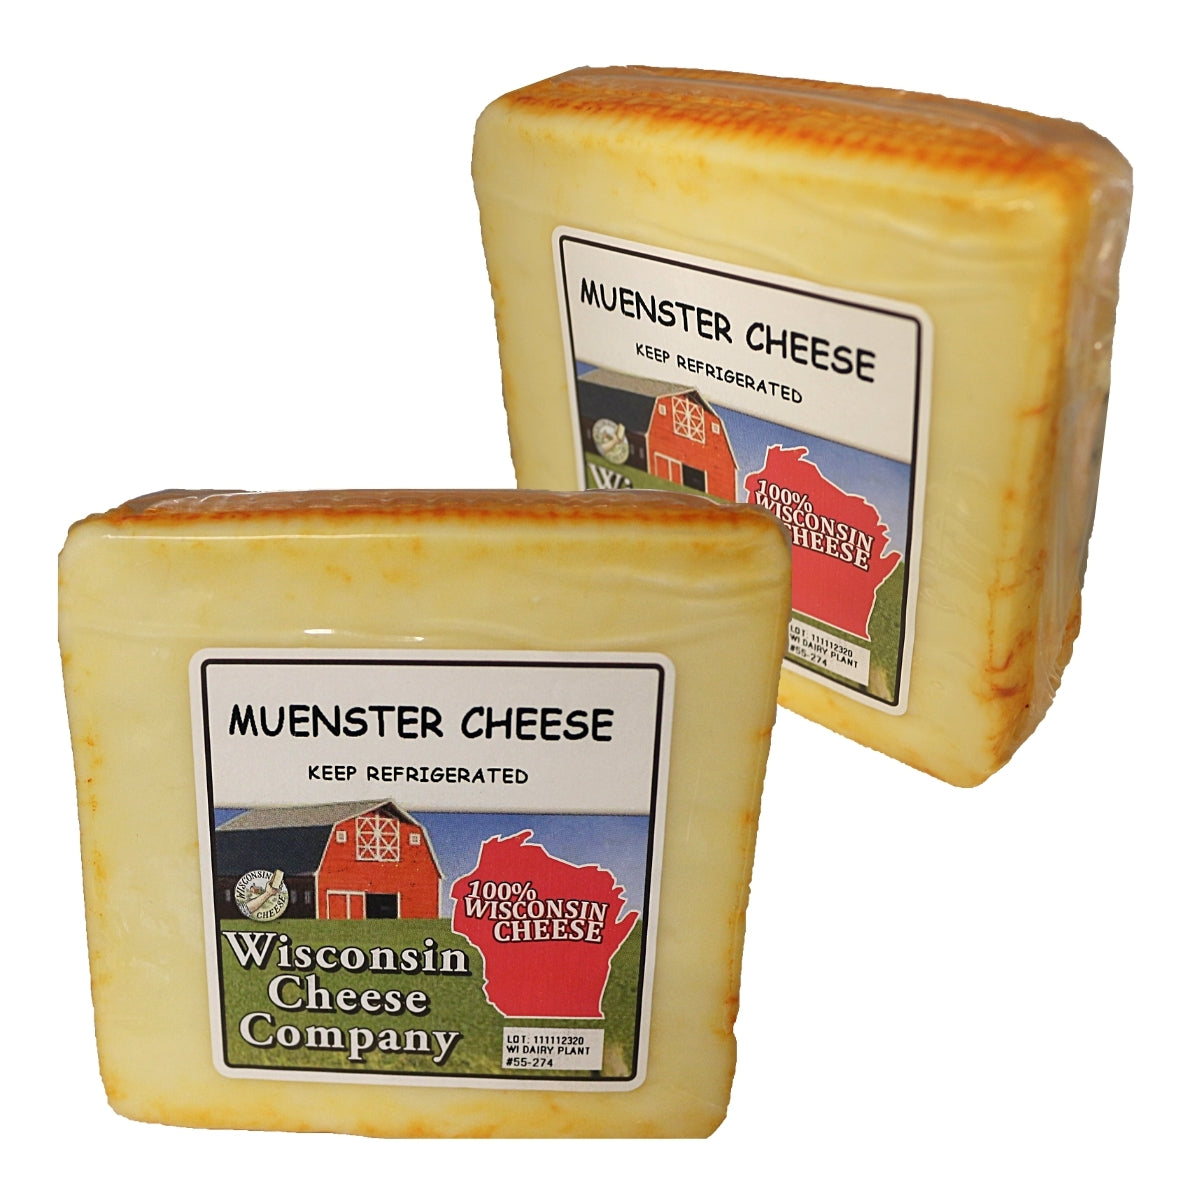 Two blocks of Muenster Cheese